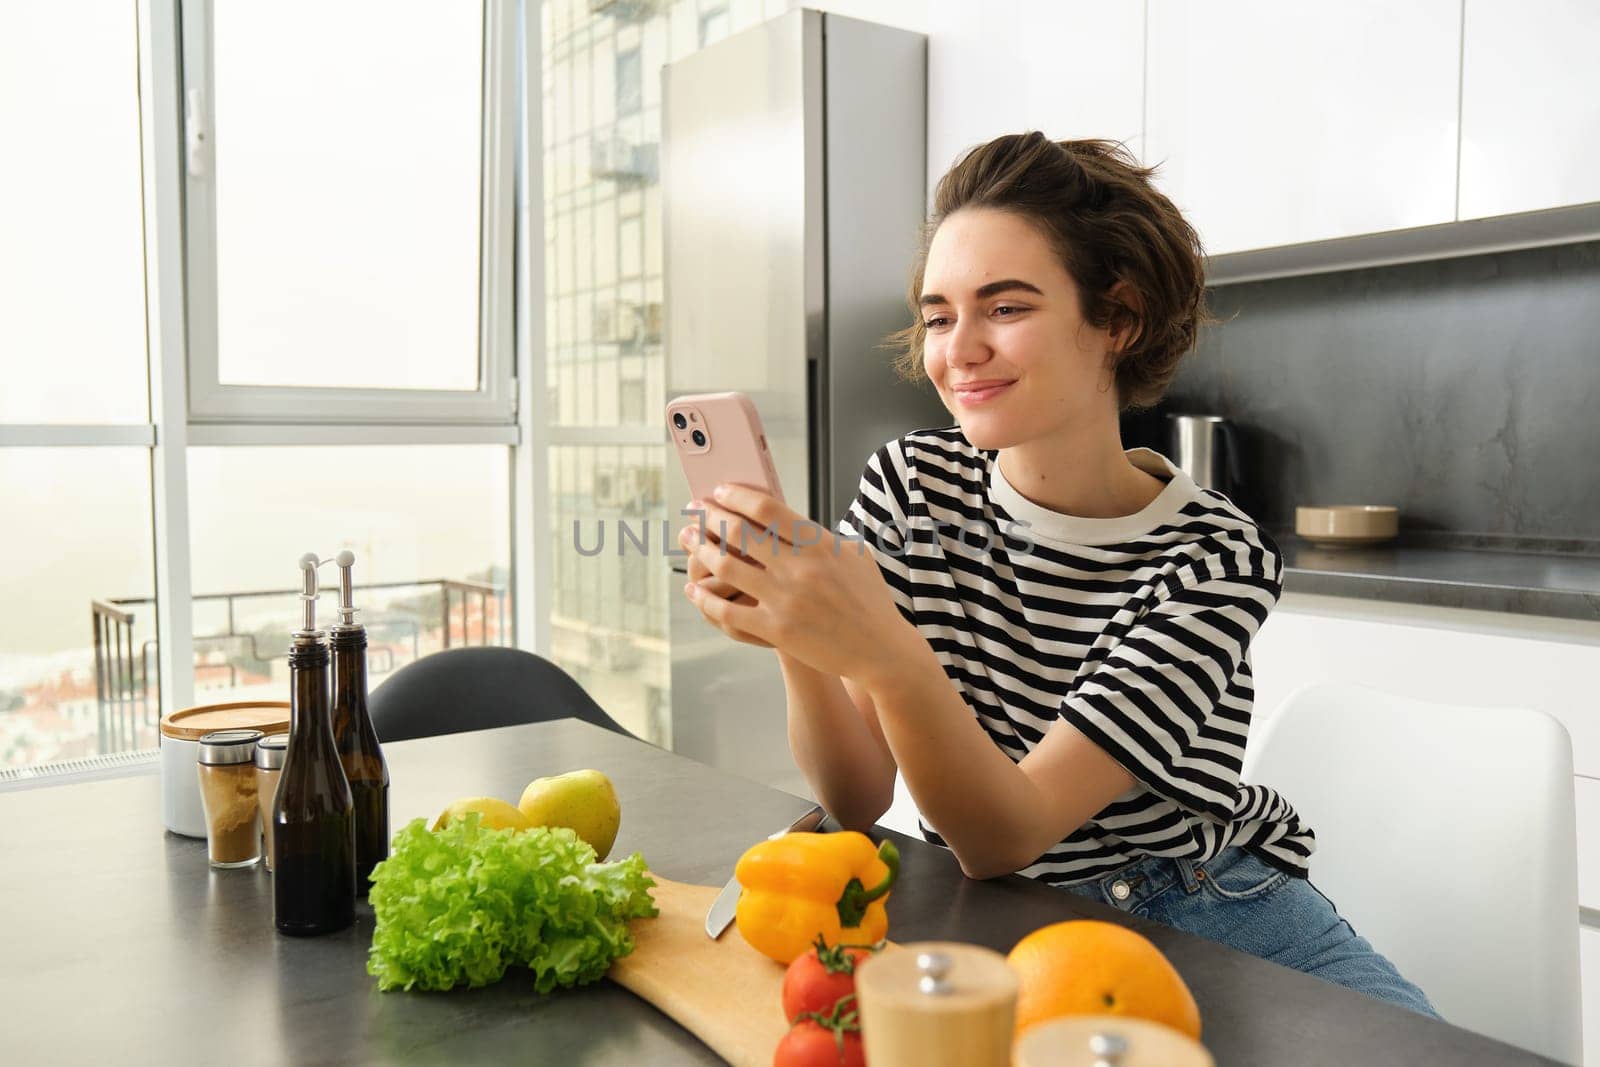 Portrait of cute smiling woman cooking salad, looking at smartphone, watching recipe, food preparation tutorial, chopping vegetables, making a meal in the kitchen. Healthy diet and lifestyle concept